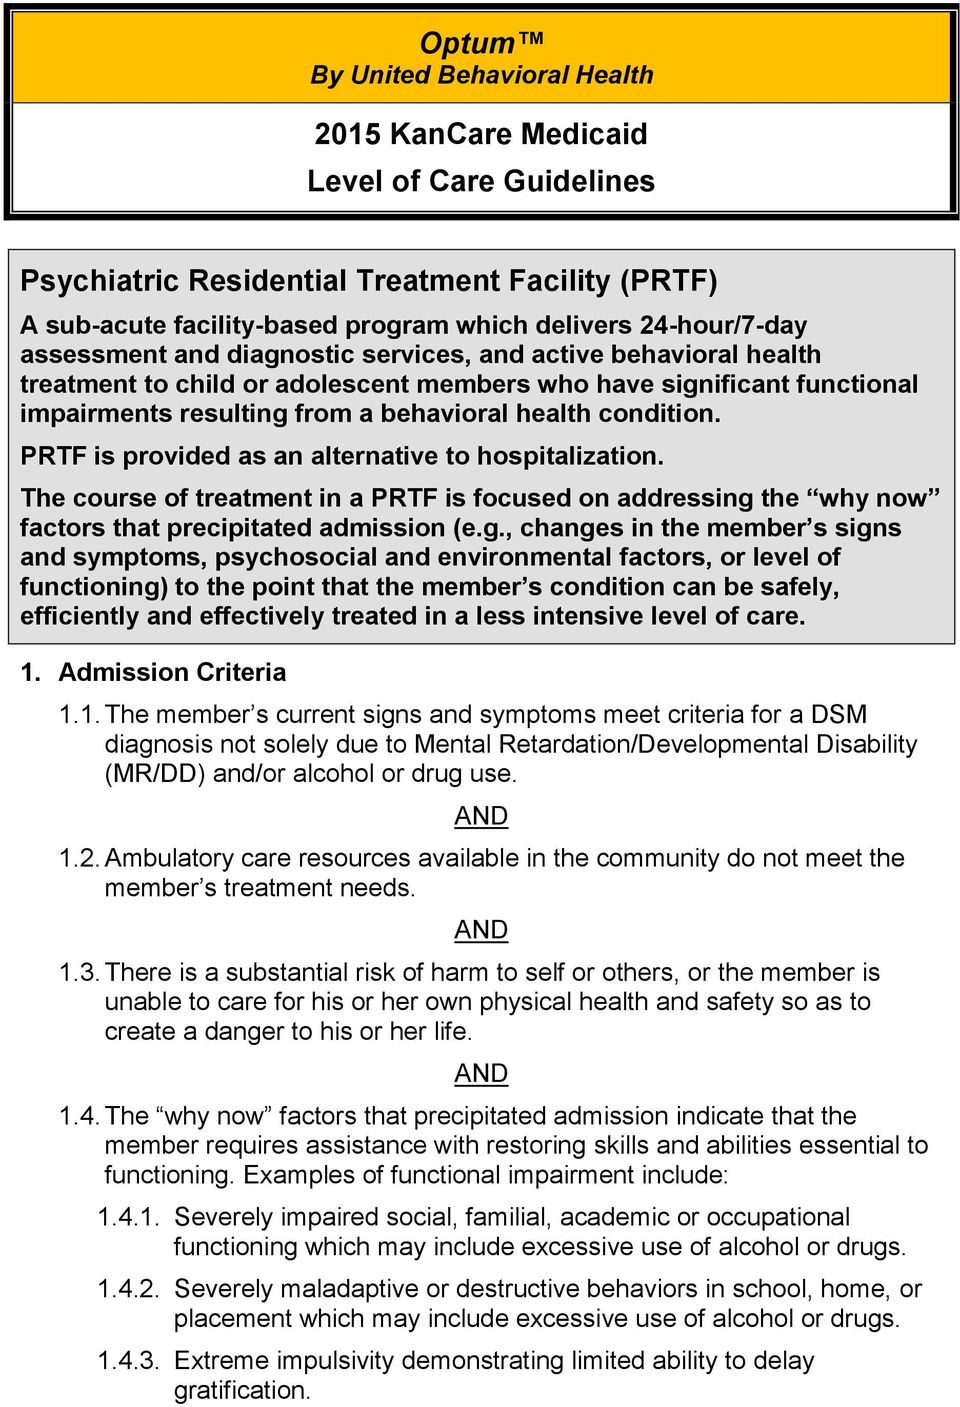 PRTF is provided as an alternative to hospitalization. The course of treatment in a PRTF is focused on addressing 